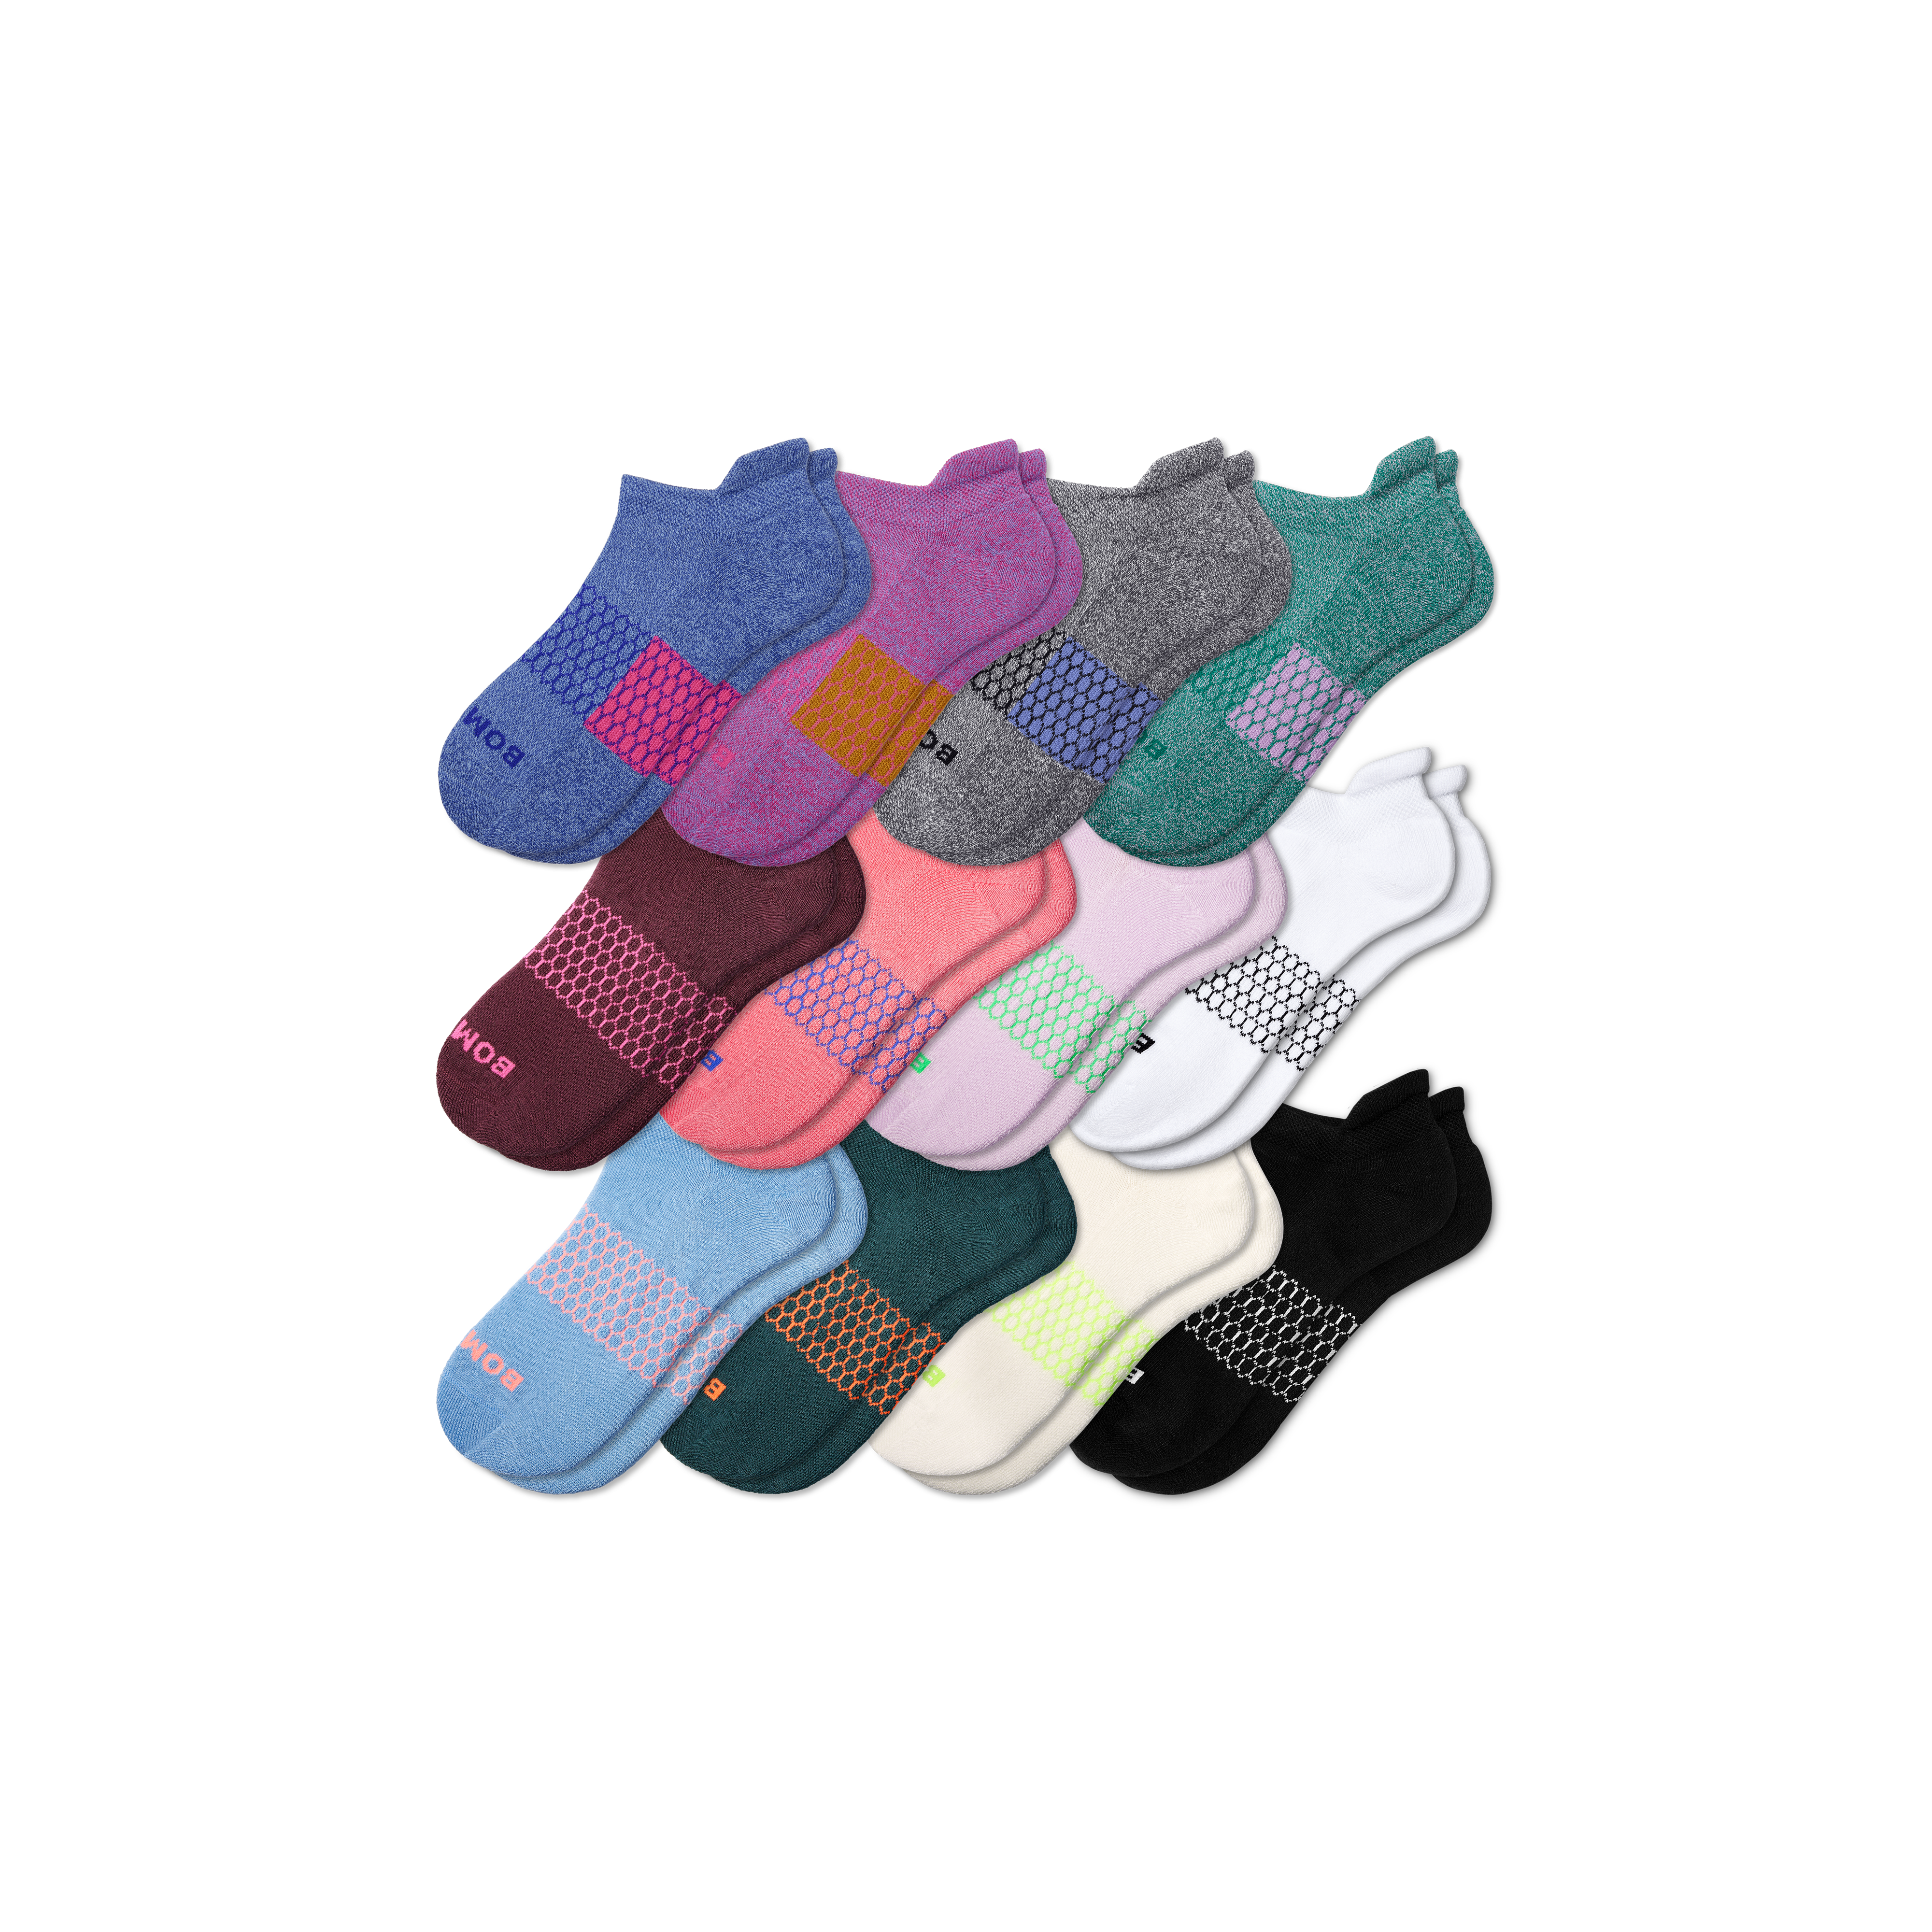 Bombas Ankle Sock 12-pack In Marls Solids Mix